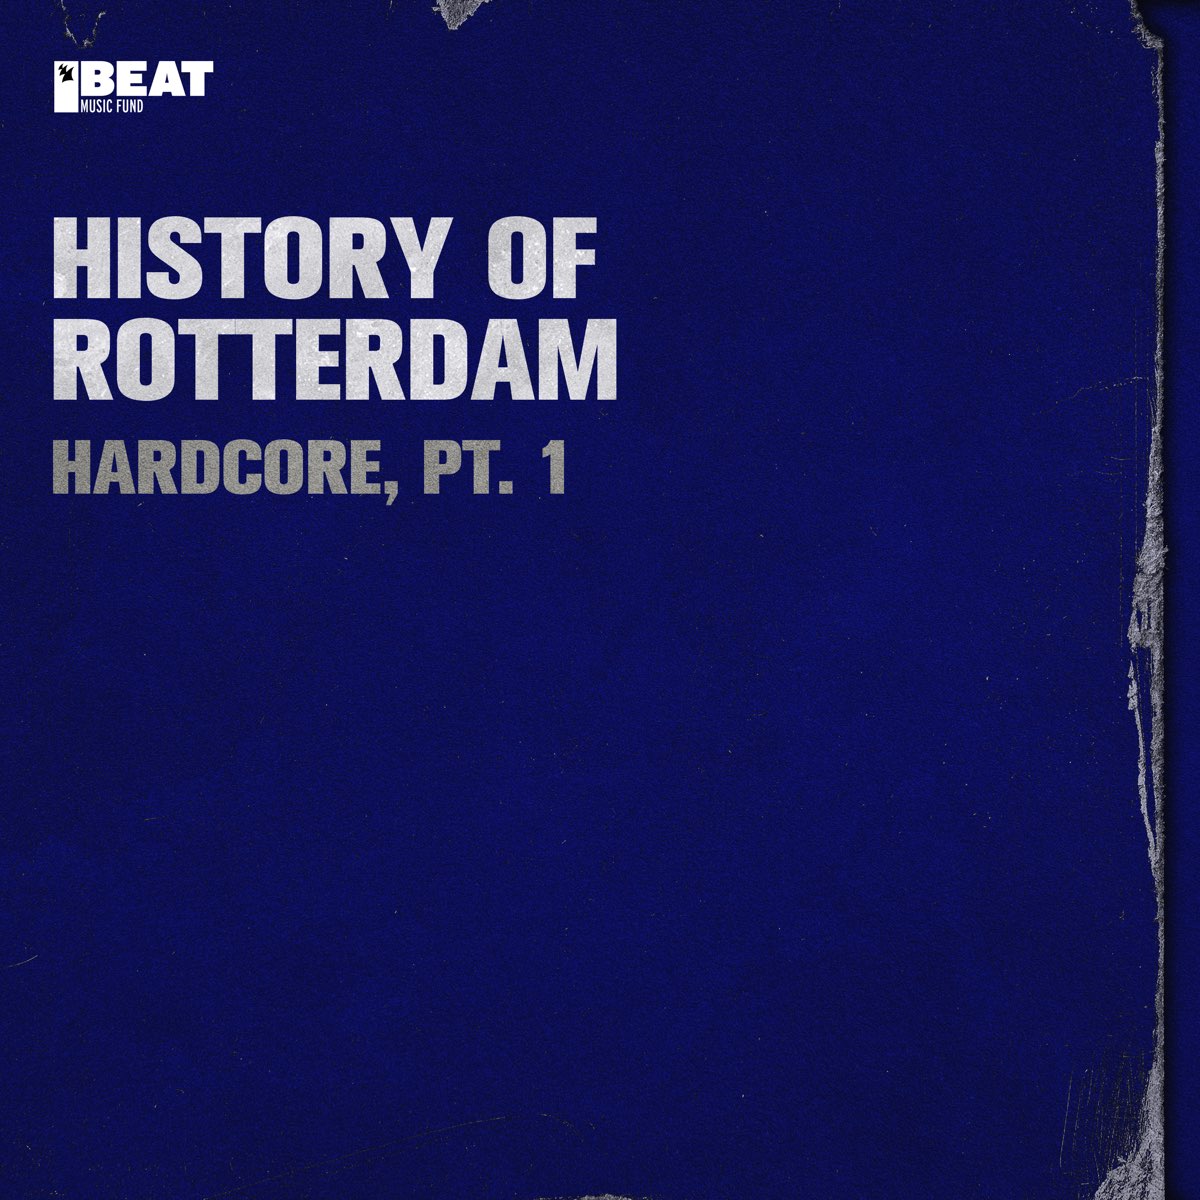 History of Rotterdam - Hardcore, Pt. 1 - EP - Album by Various 